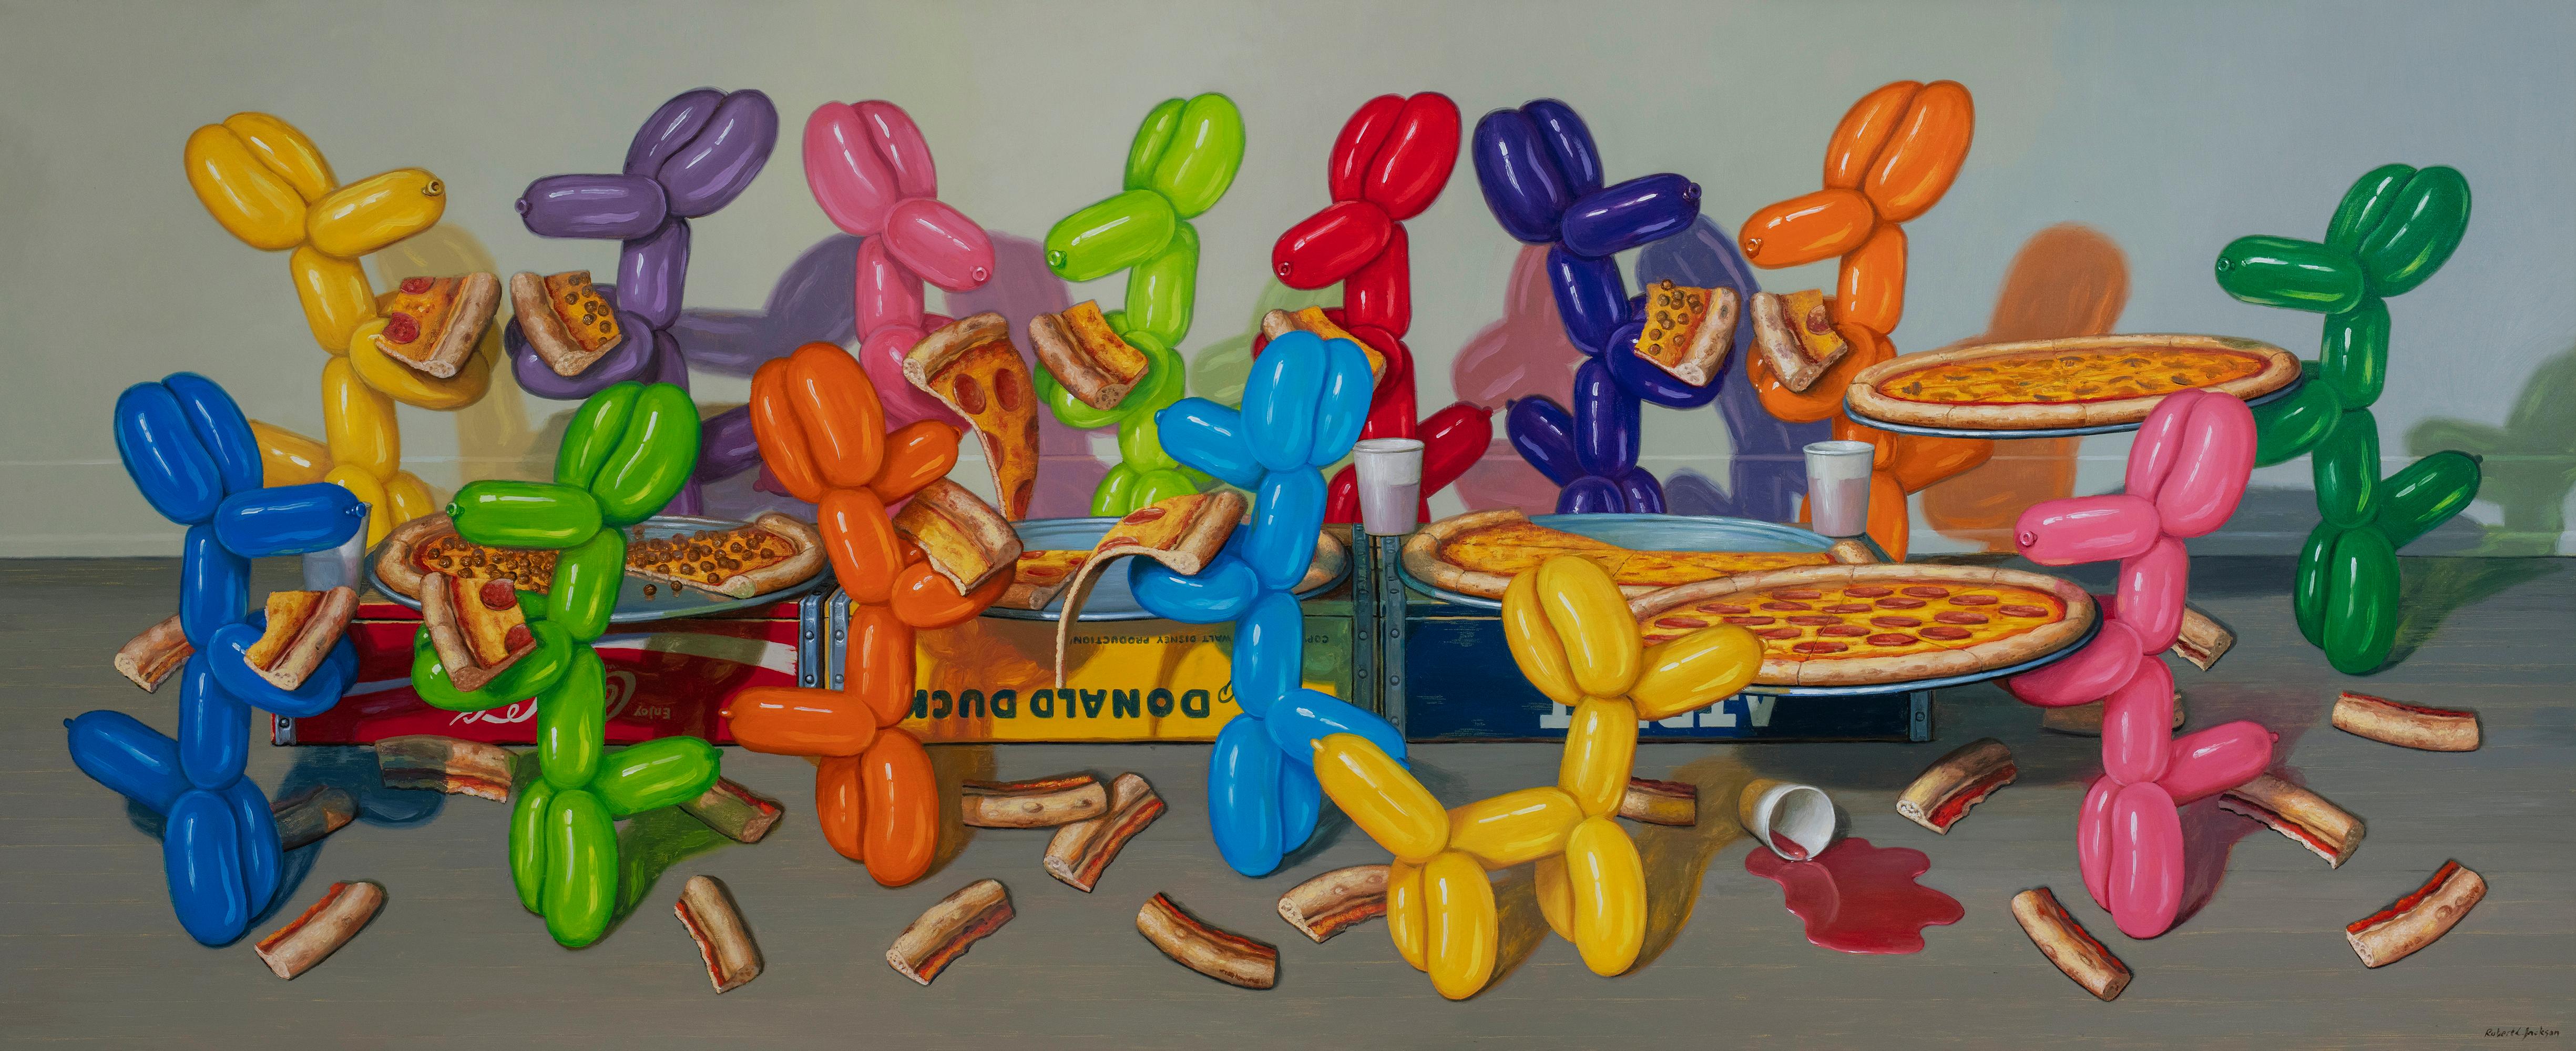 Robert Jackson - PIZZA FEAST, dinner party, pizza, balloon dogs, food,  vibrant color, still life For Sale at 1stDibs